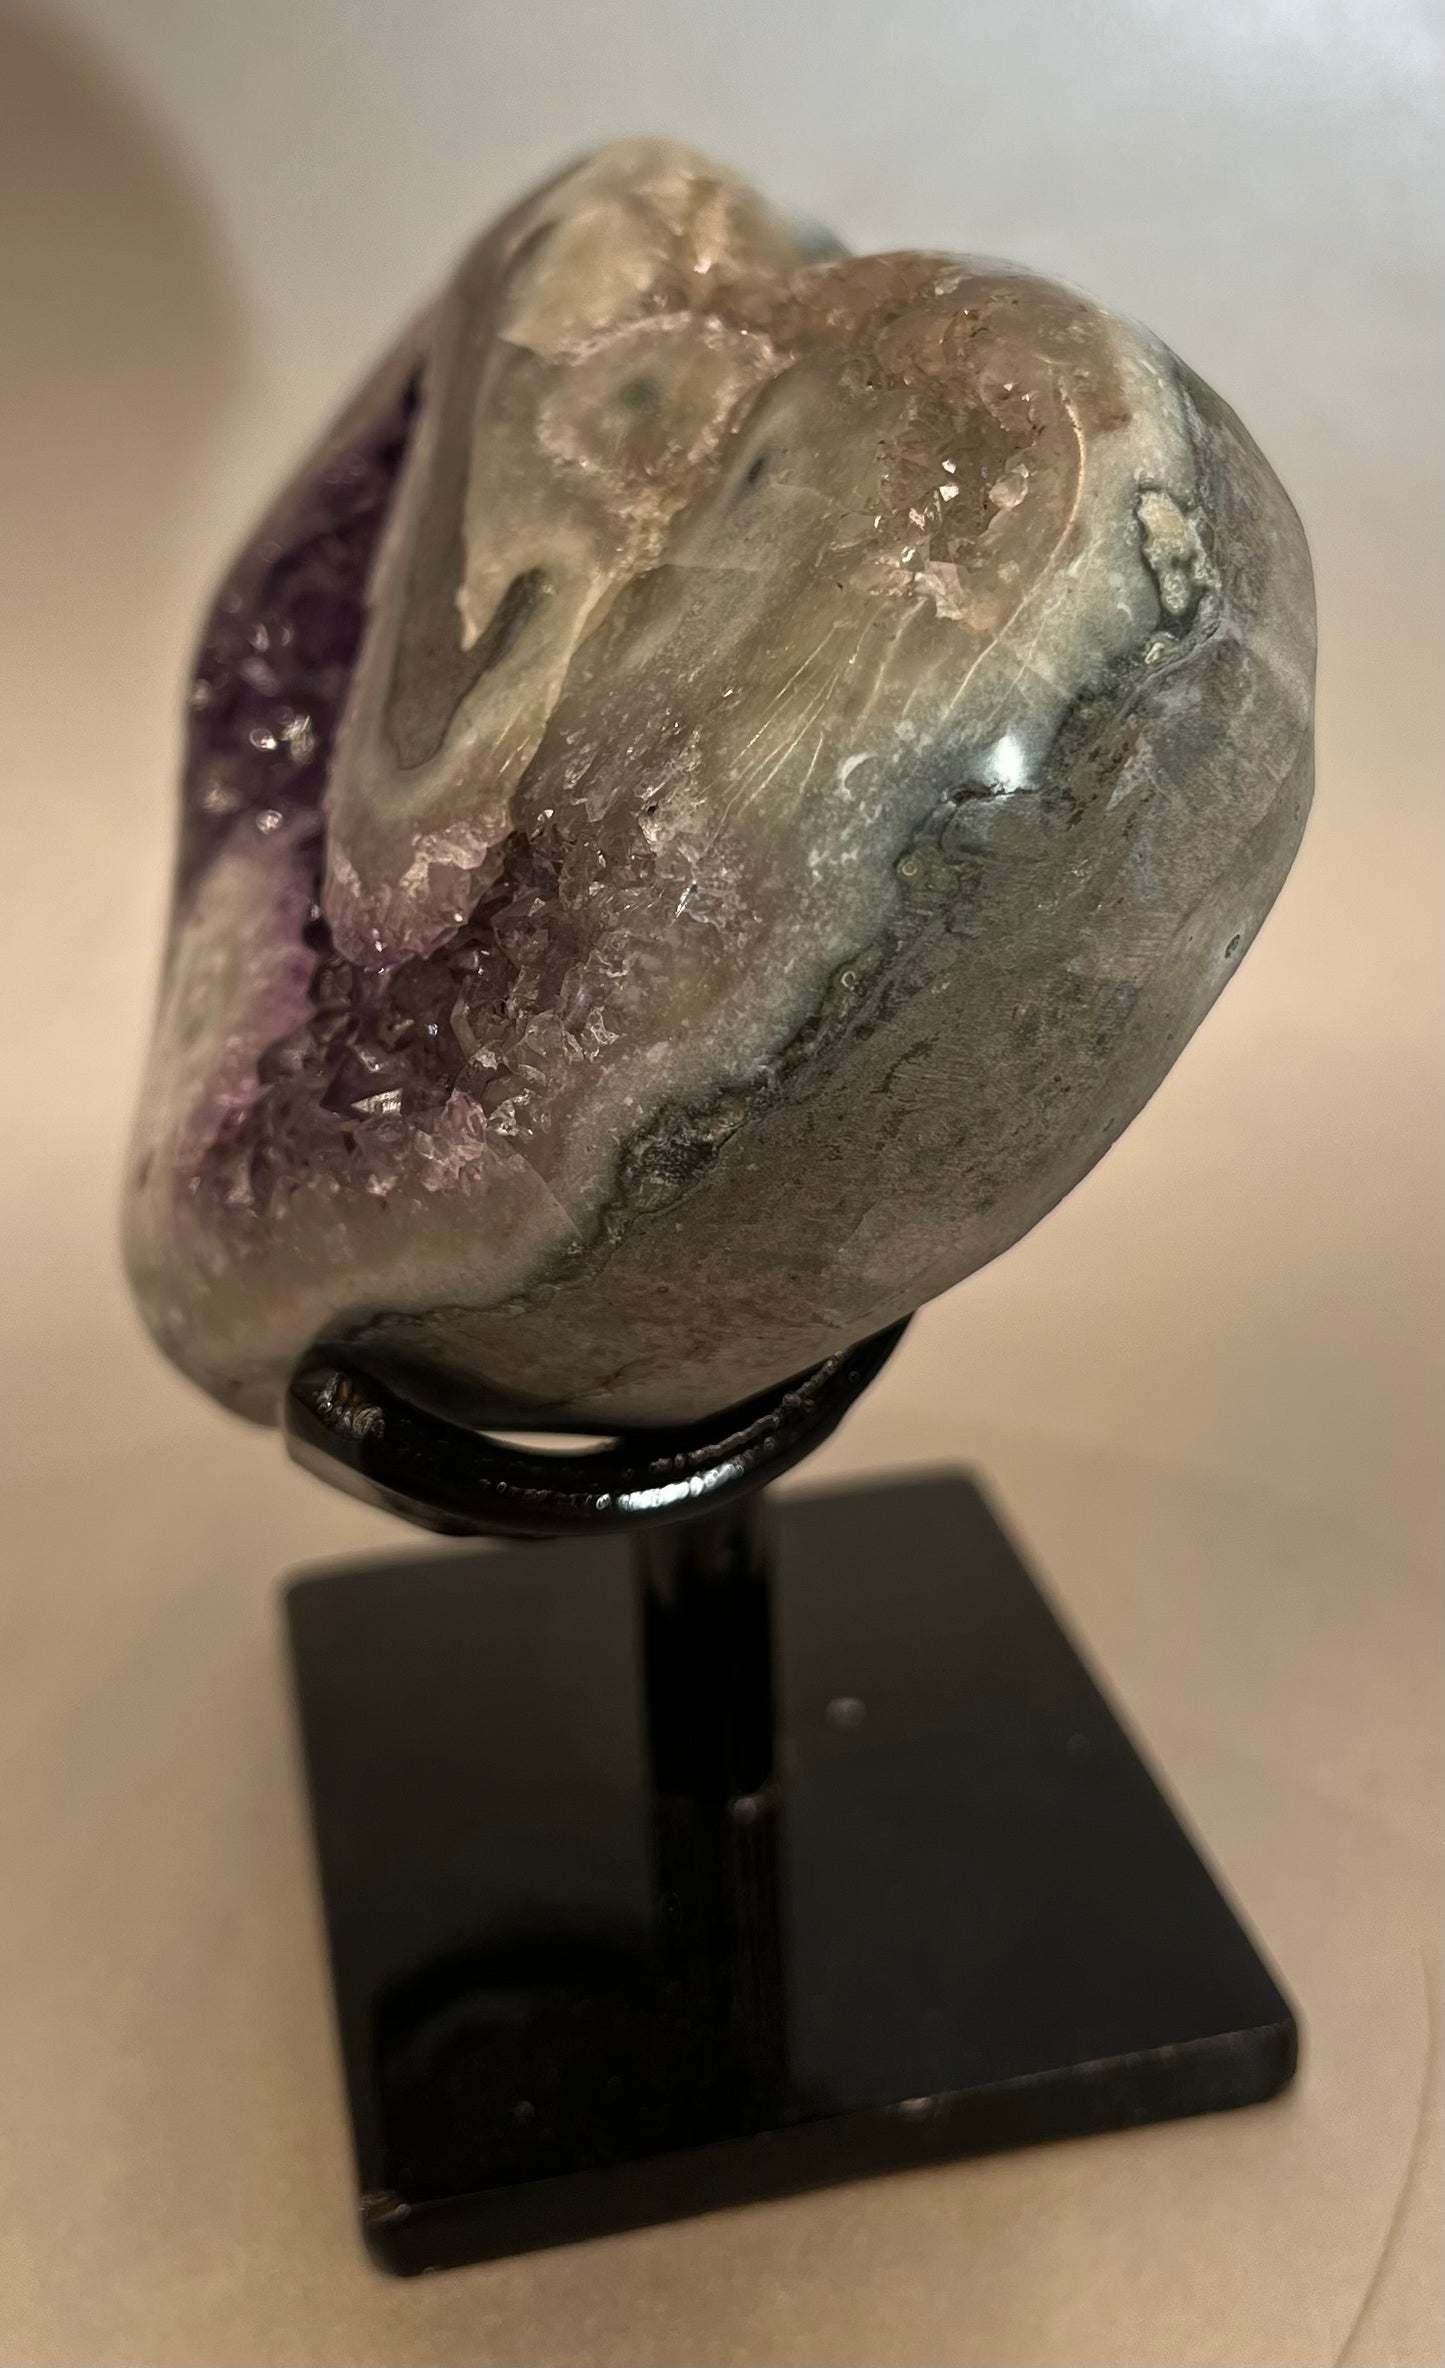 Amethyst Heart on Stand